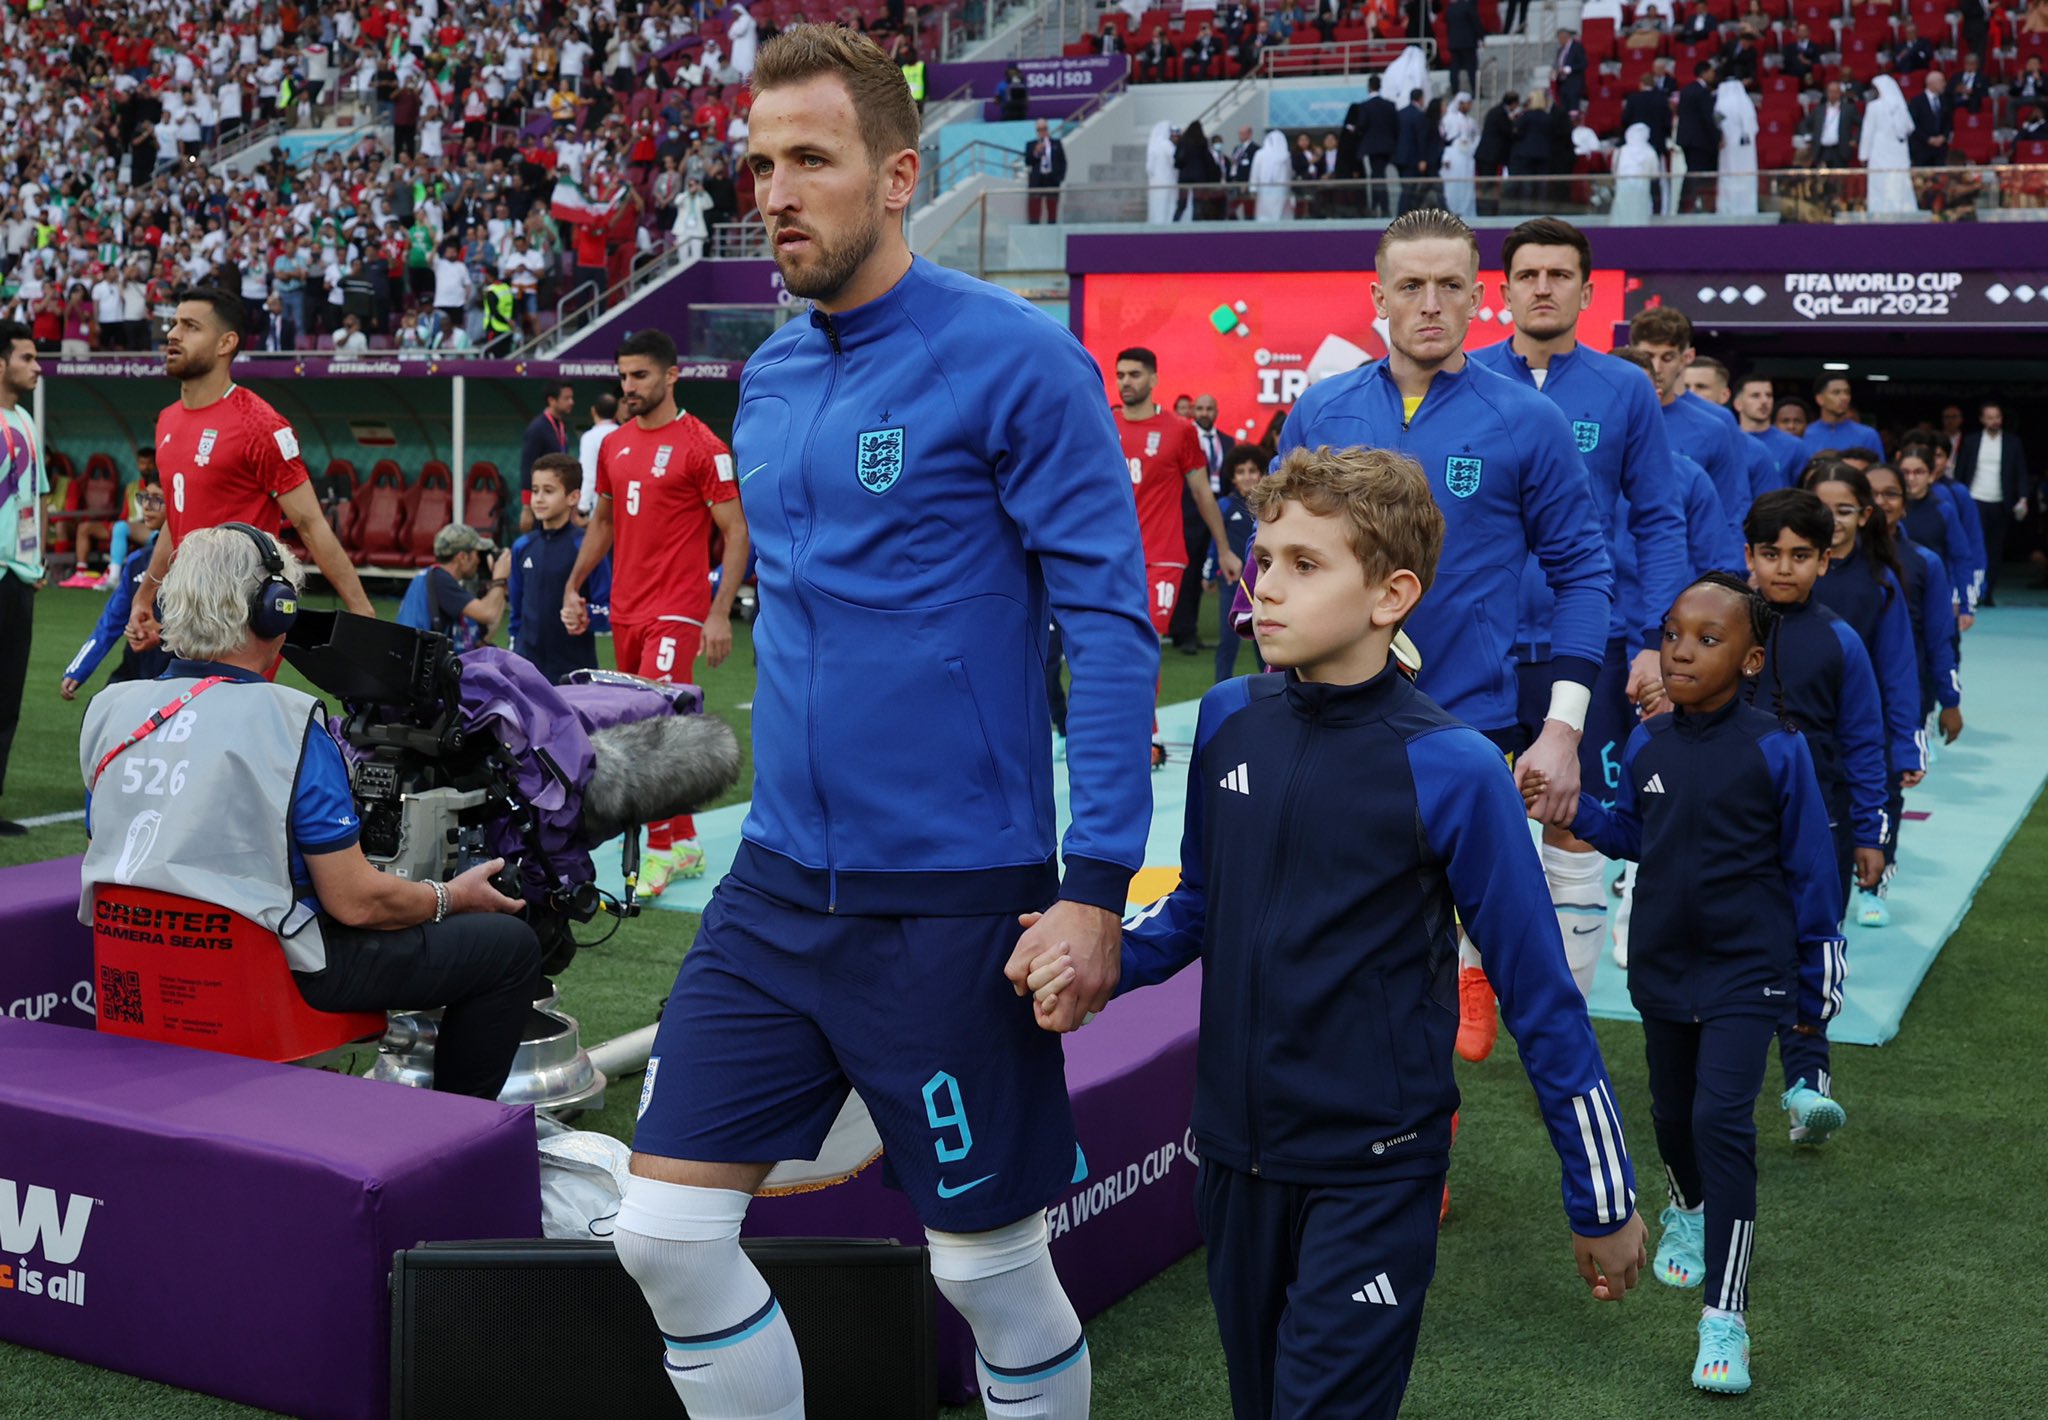 Harry Kane Onelove ban dismay - England captain walks out without armband against Iran